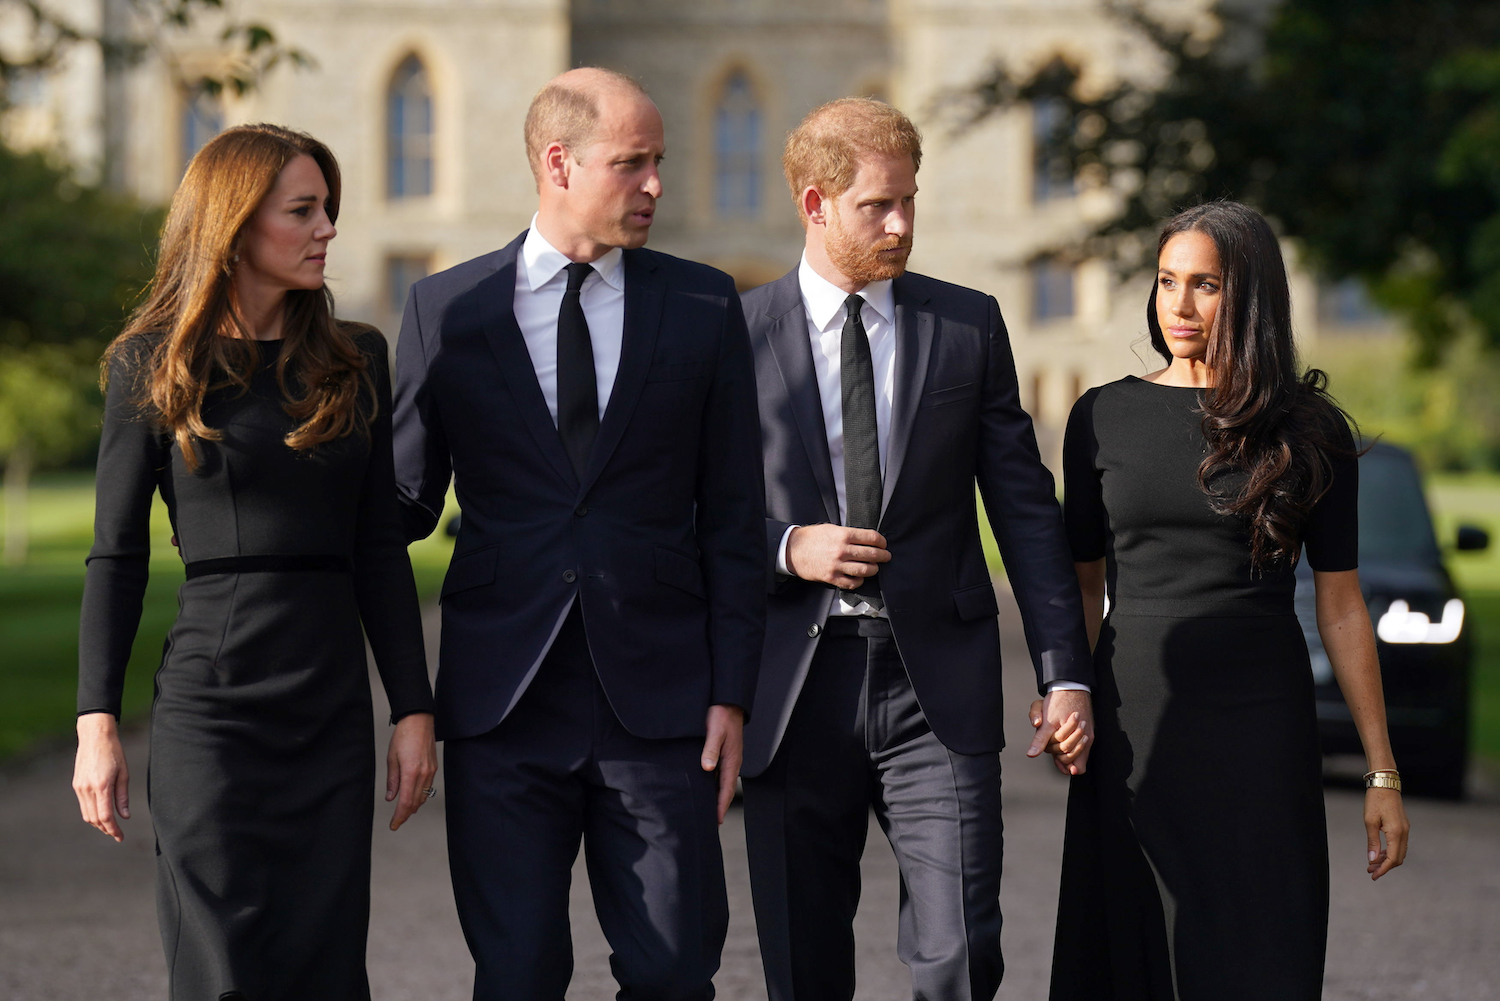 Meghan Markle body language during appearance with Prince Harry, Prince William, and Kate Middleton at Windsor Castle